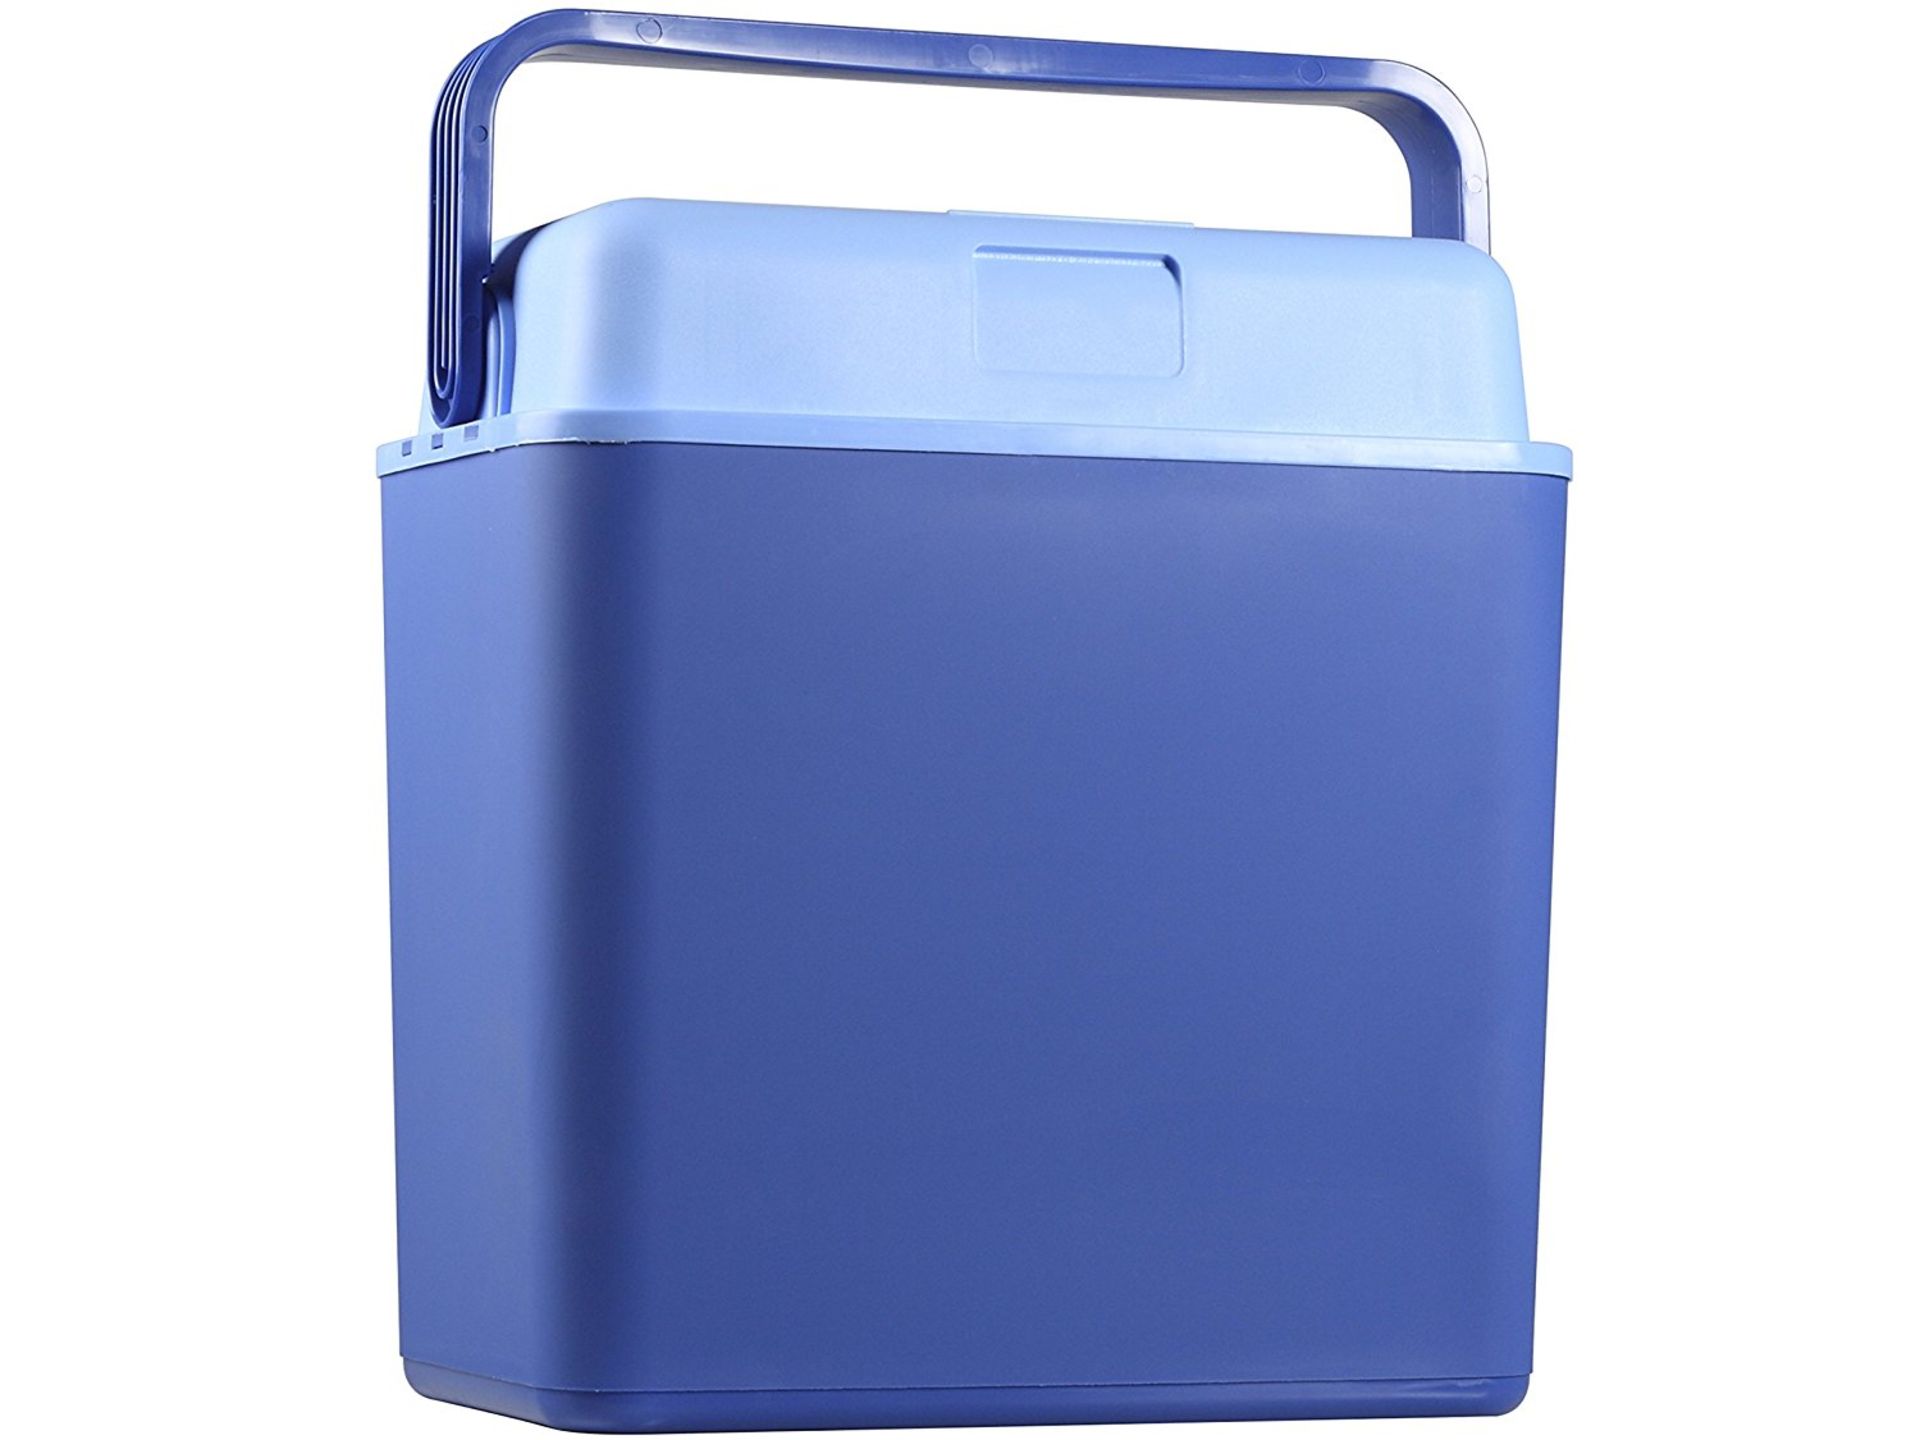 10 x Tristar Thermoelectric 24 Litre Lightweight Cool Boxes - Ideal For Camping, Picnics or